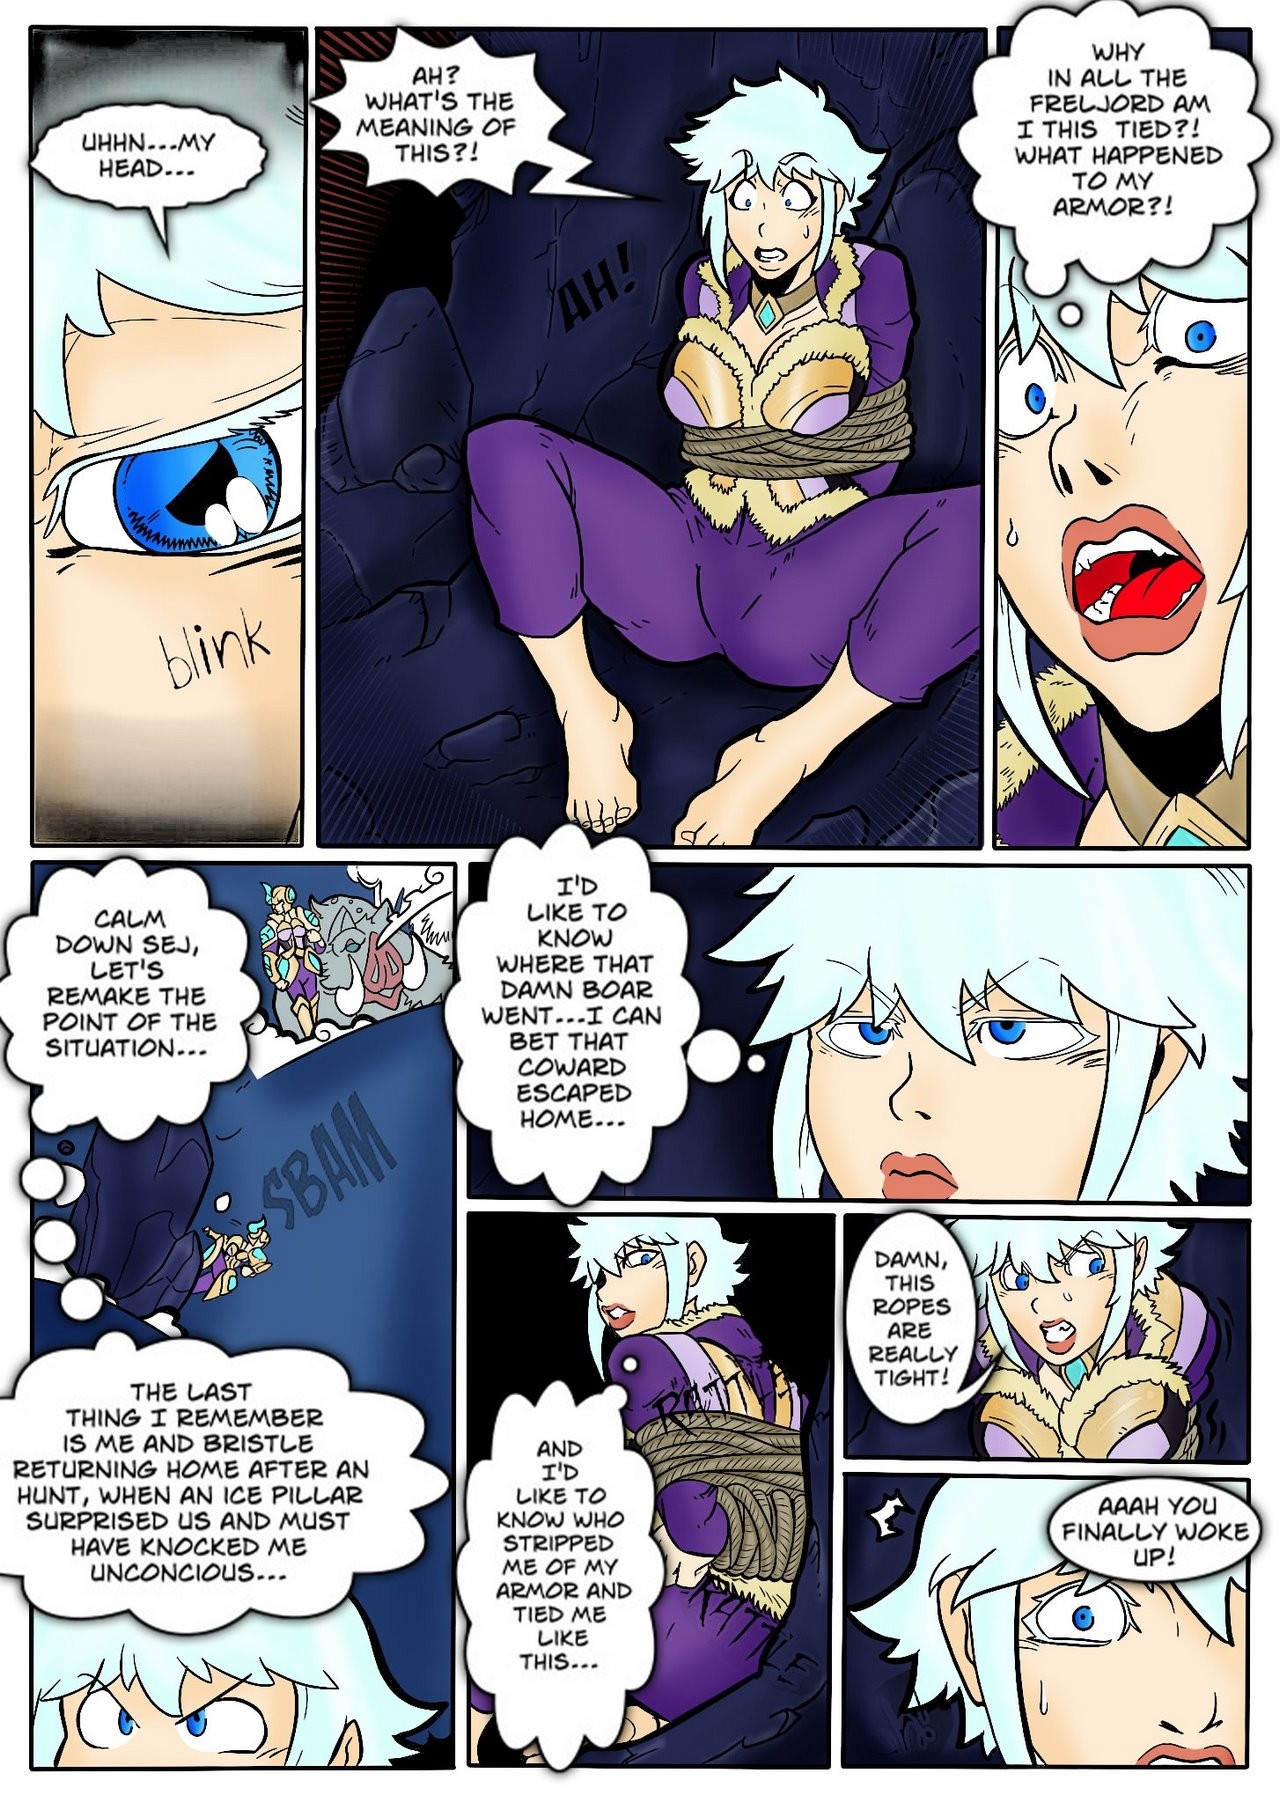 Tales of the Troll King ch. 1 - 3 ] [Colorized] porn comic picture 21